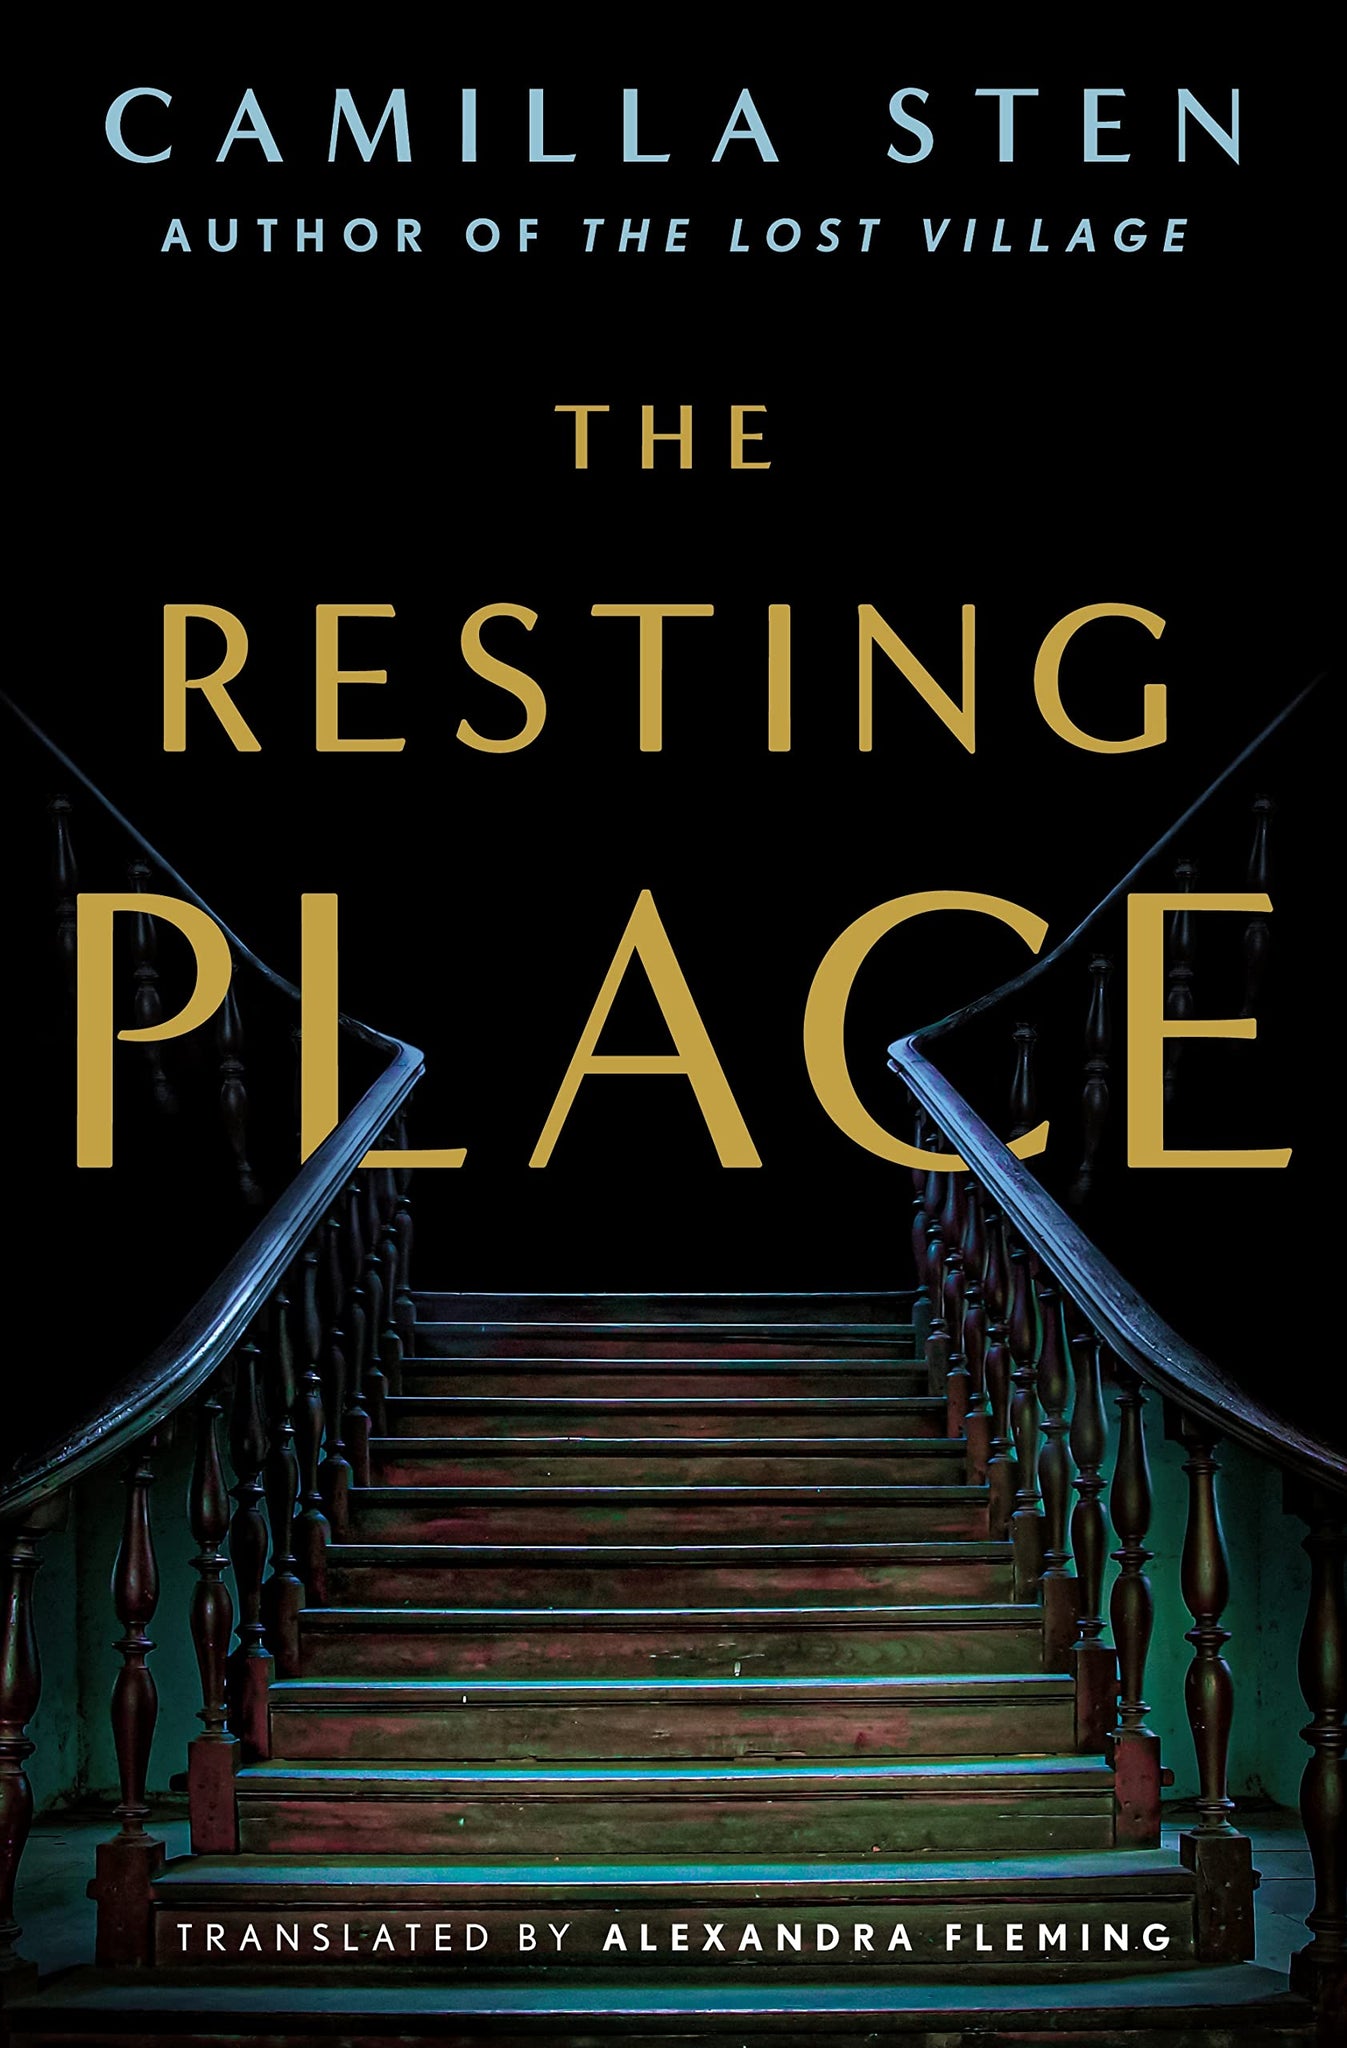 The Resting Place by Camilla Sten - hardcvr